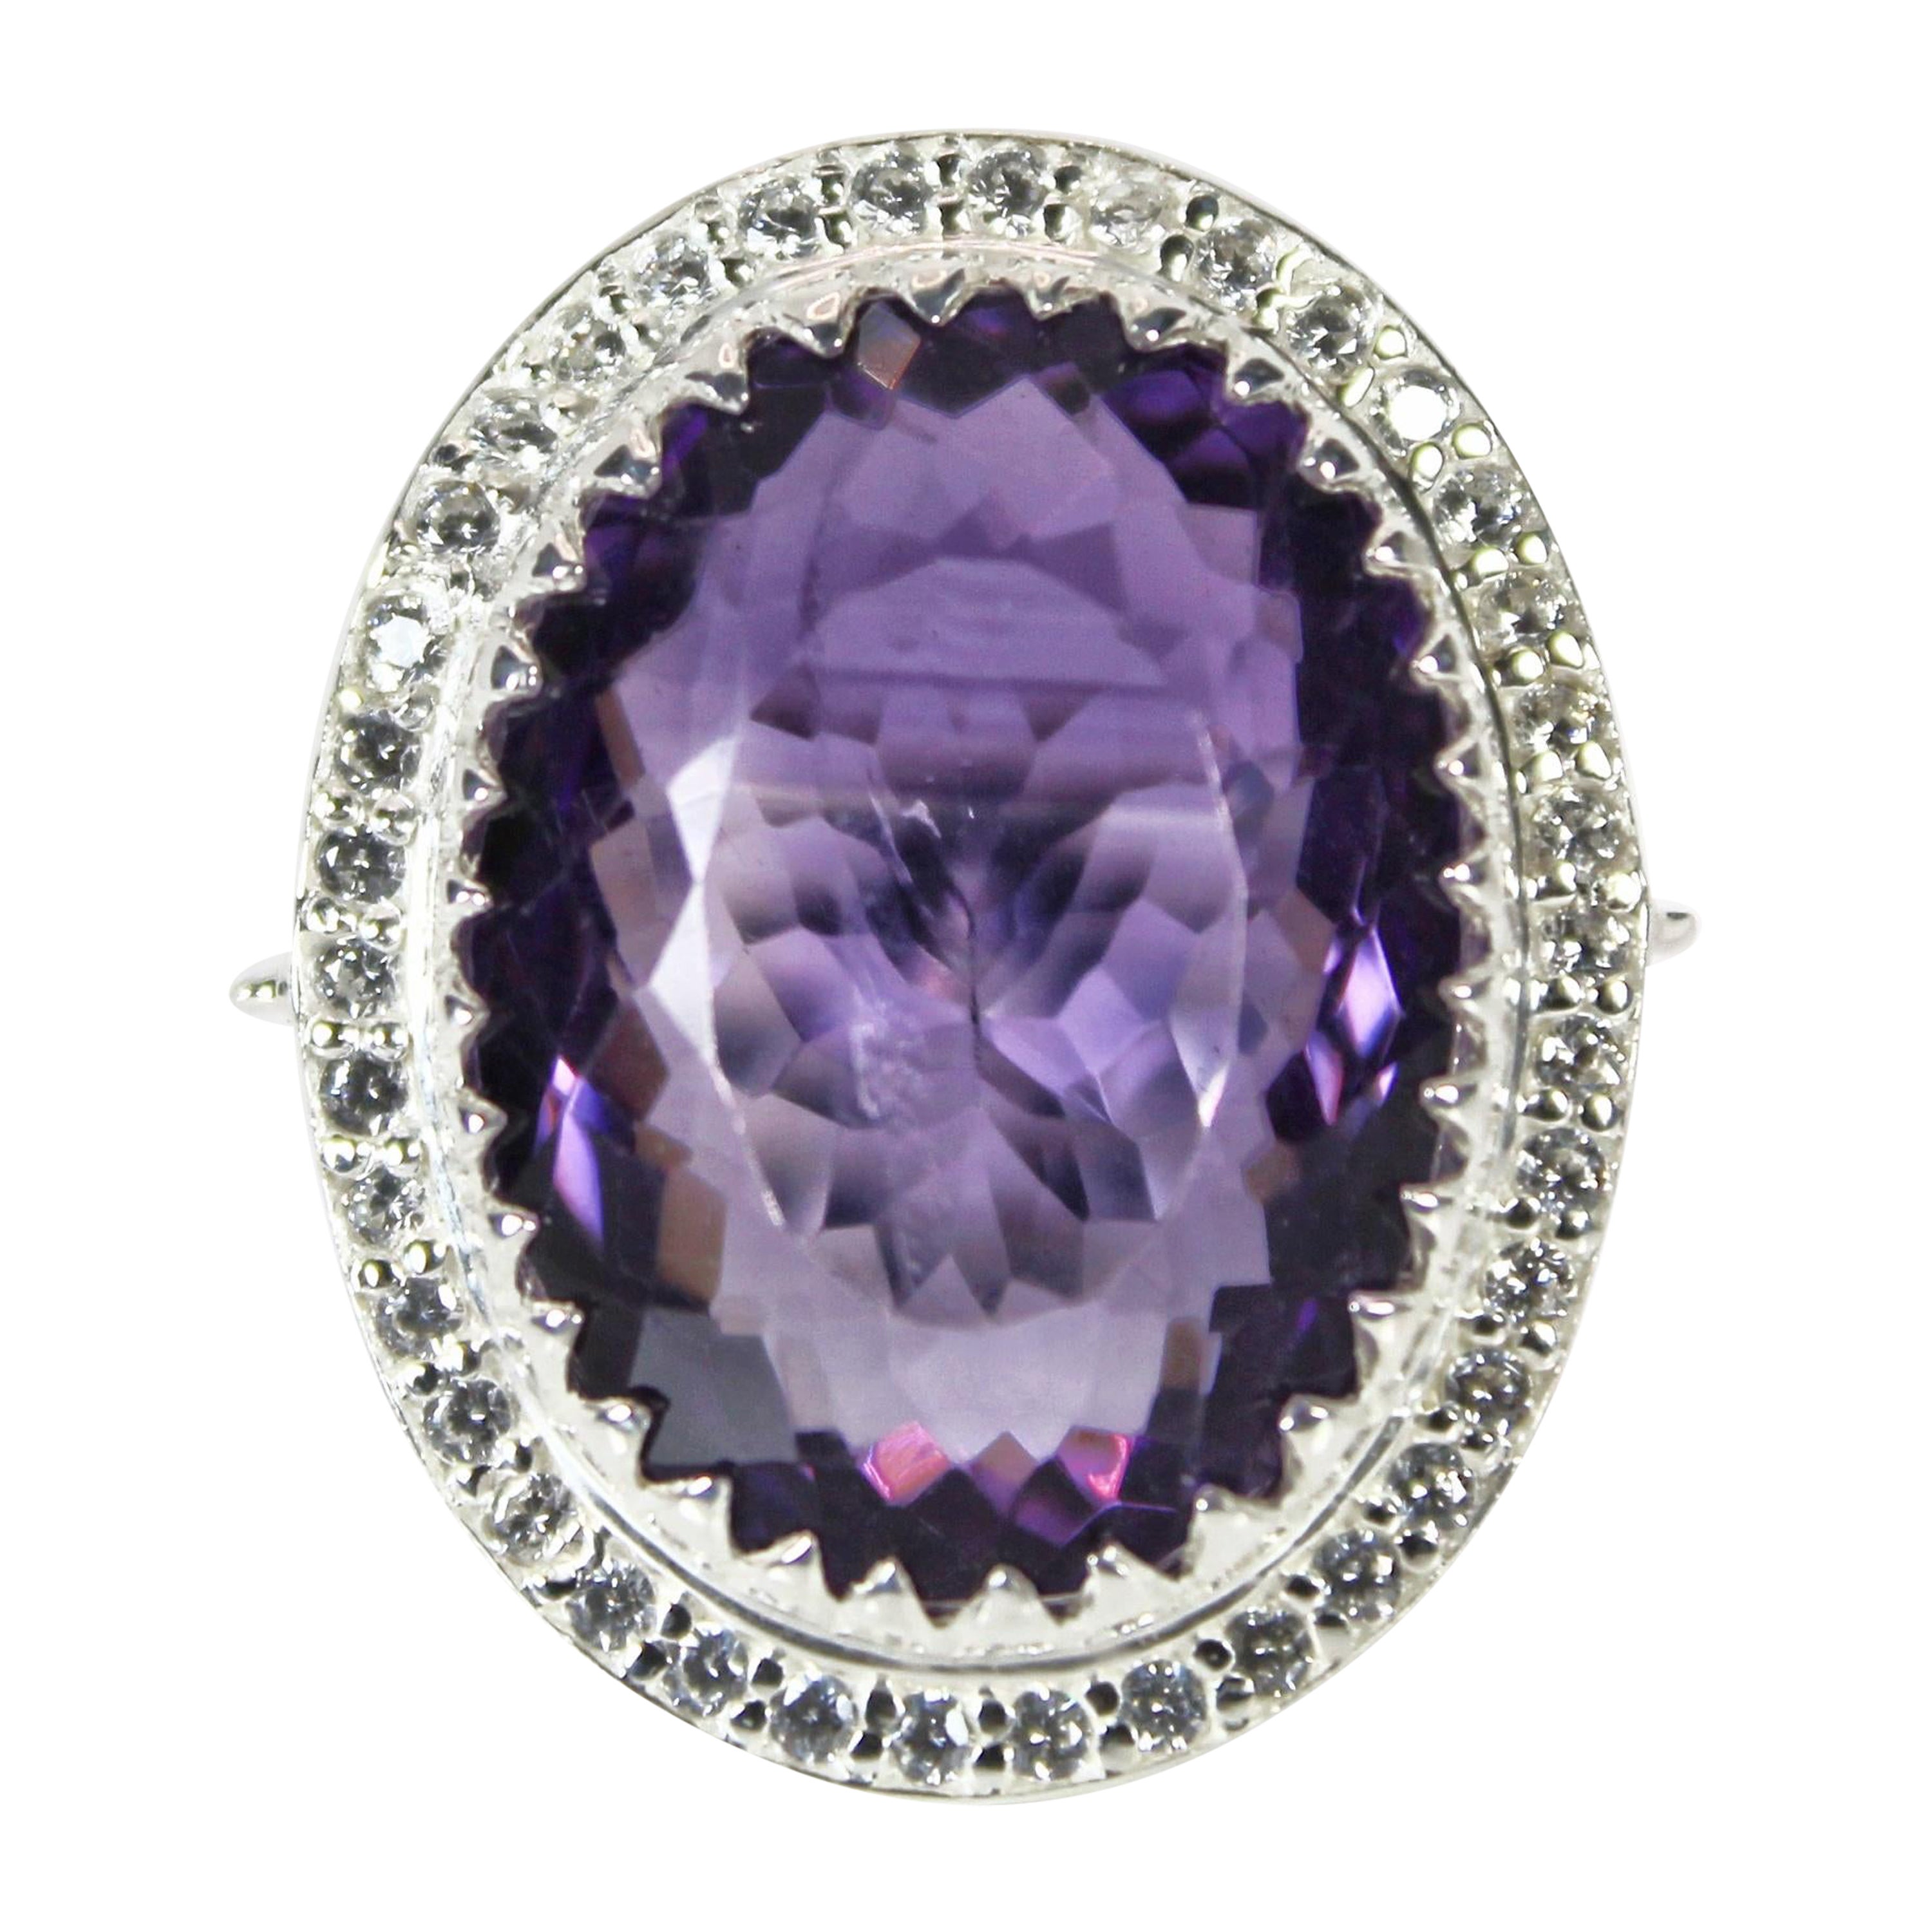 11 carat Oval Cut Natural Amethyst Ring For Sale